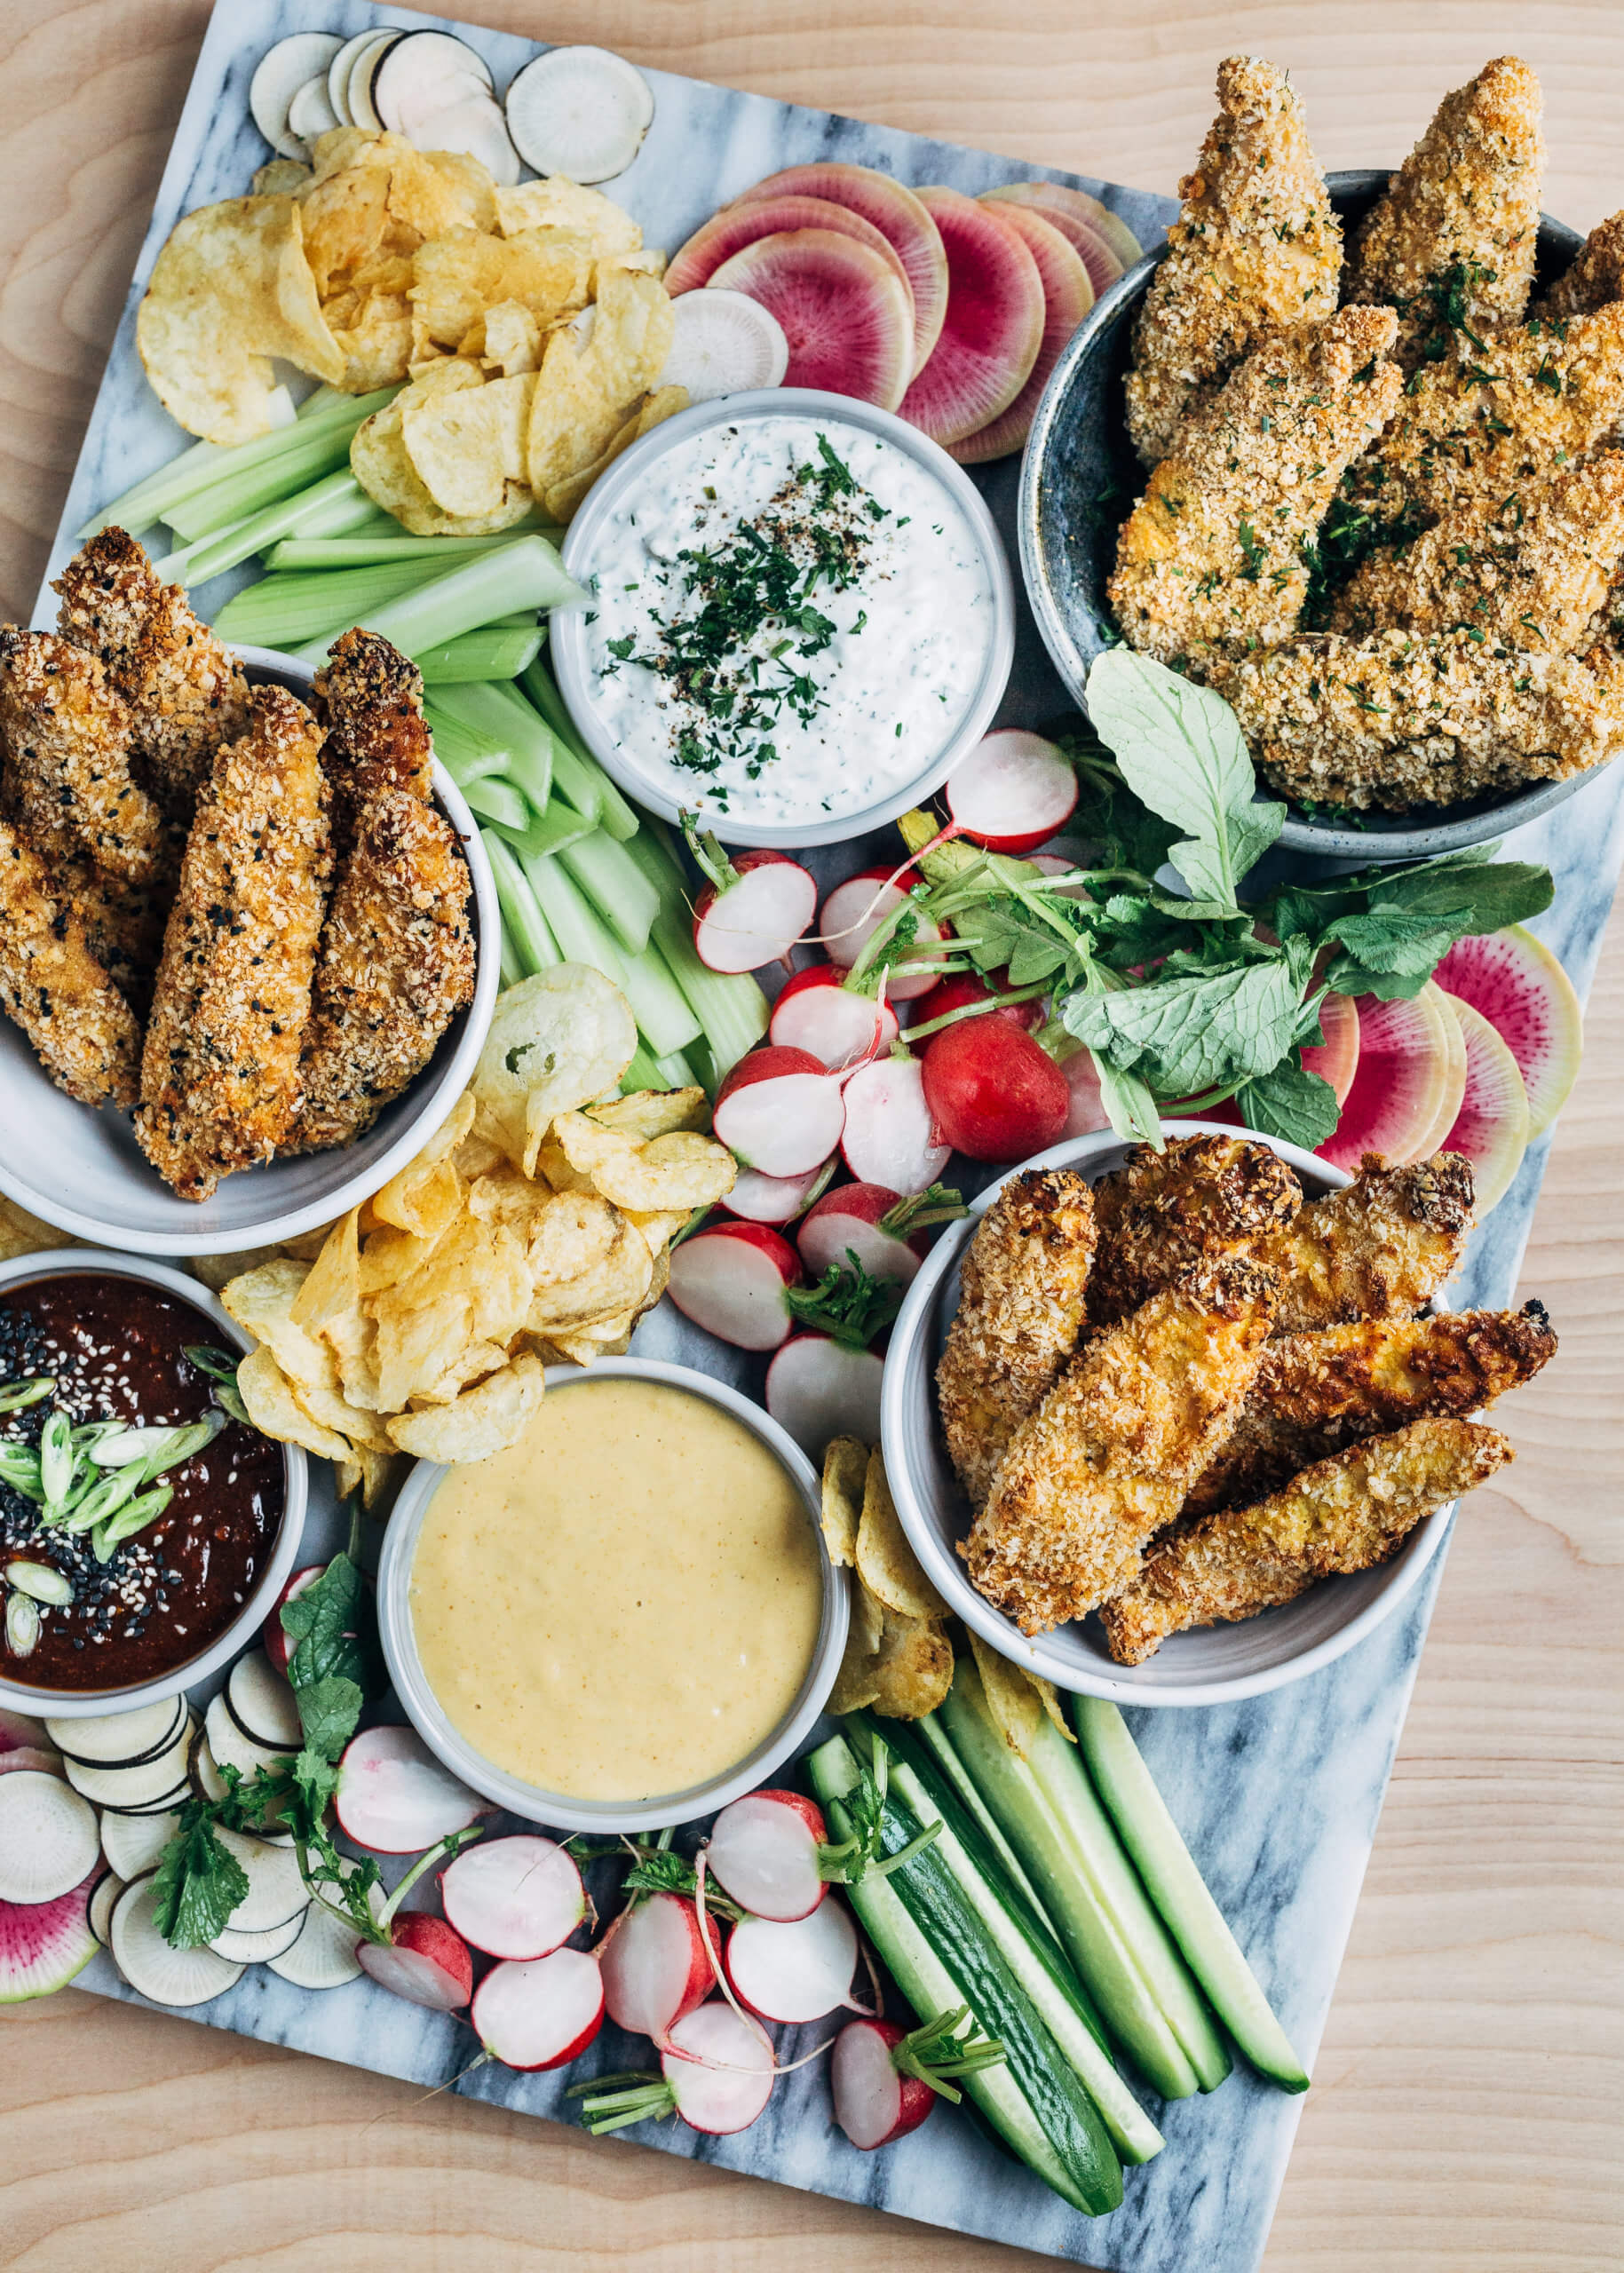 This vibrant chicken tenders board features juicy oven-baked chicken tenders in three delicious flavor profiles: garlic and herb with yogurt ranch, sesame-ginger with a sweet and sour dipping sauce, and classic honey mustard with a spicy sweet Dijon dipping sauce.